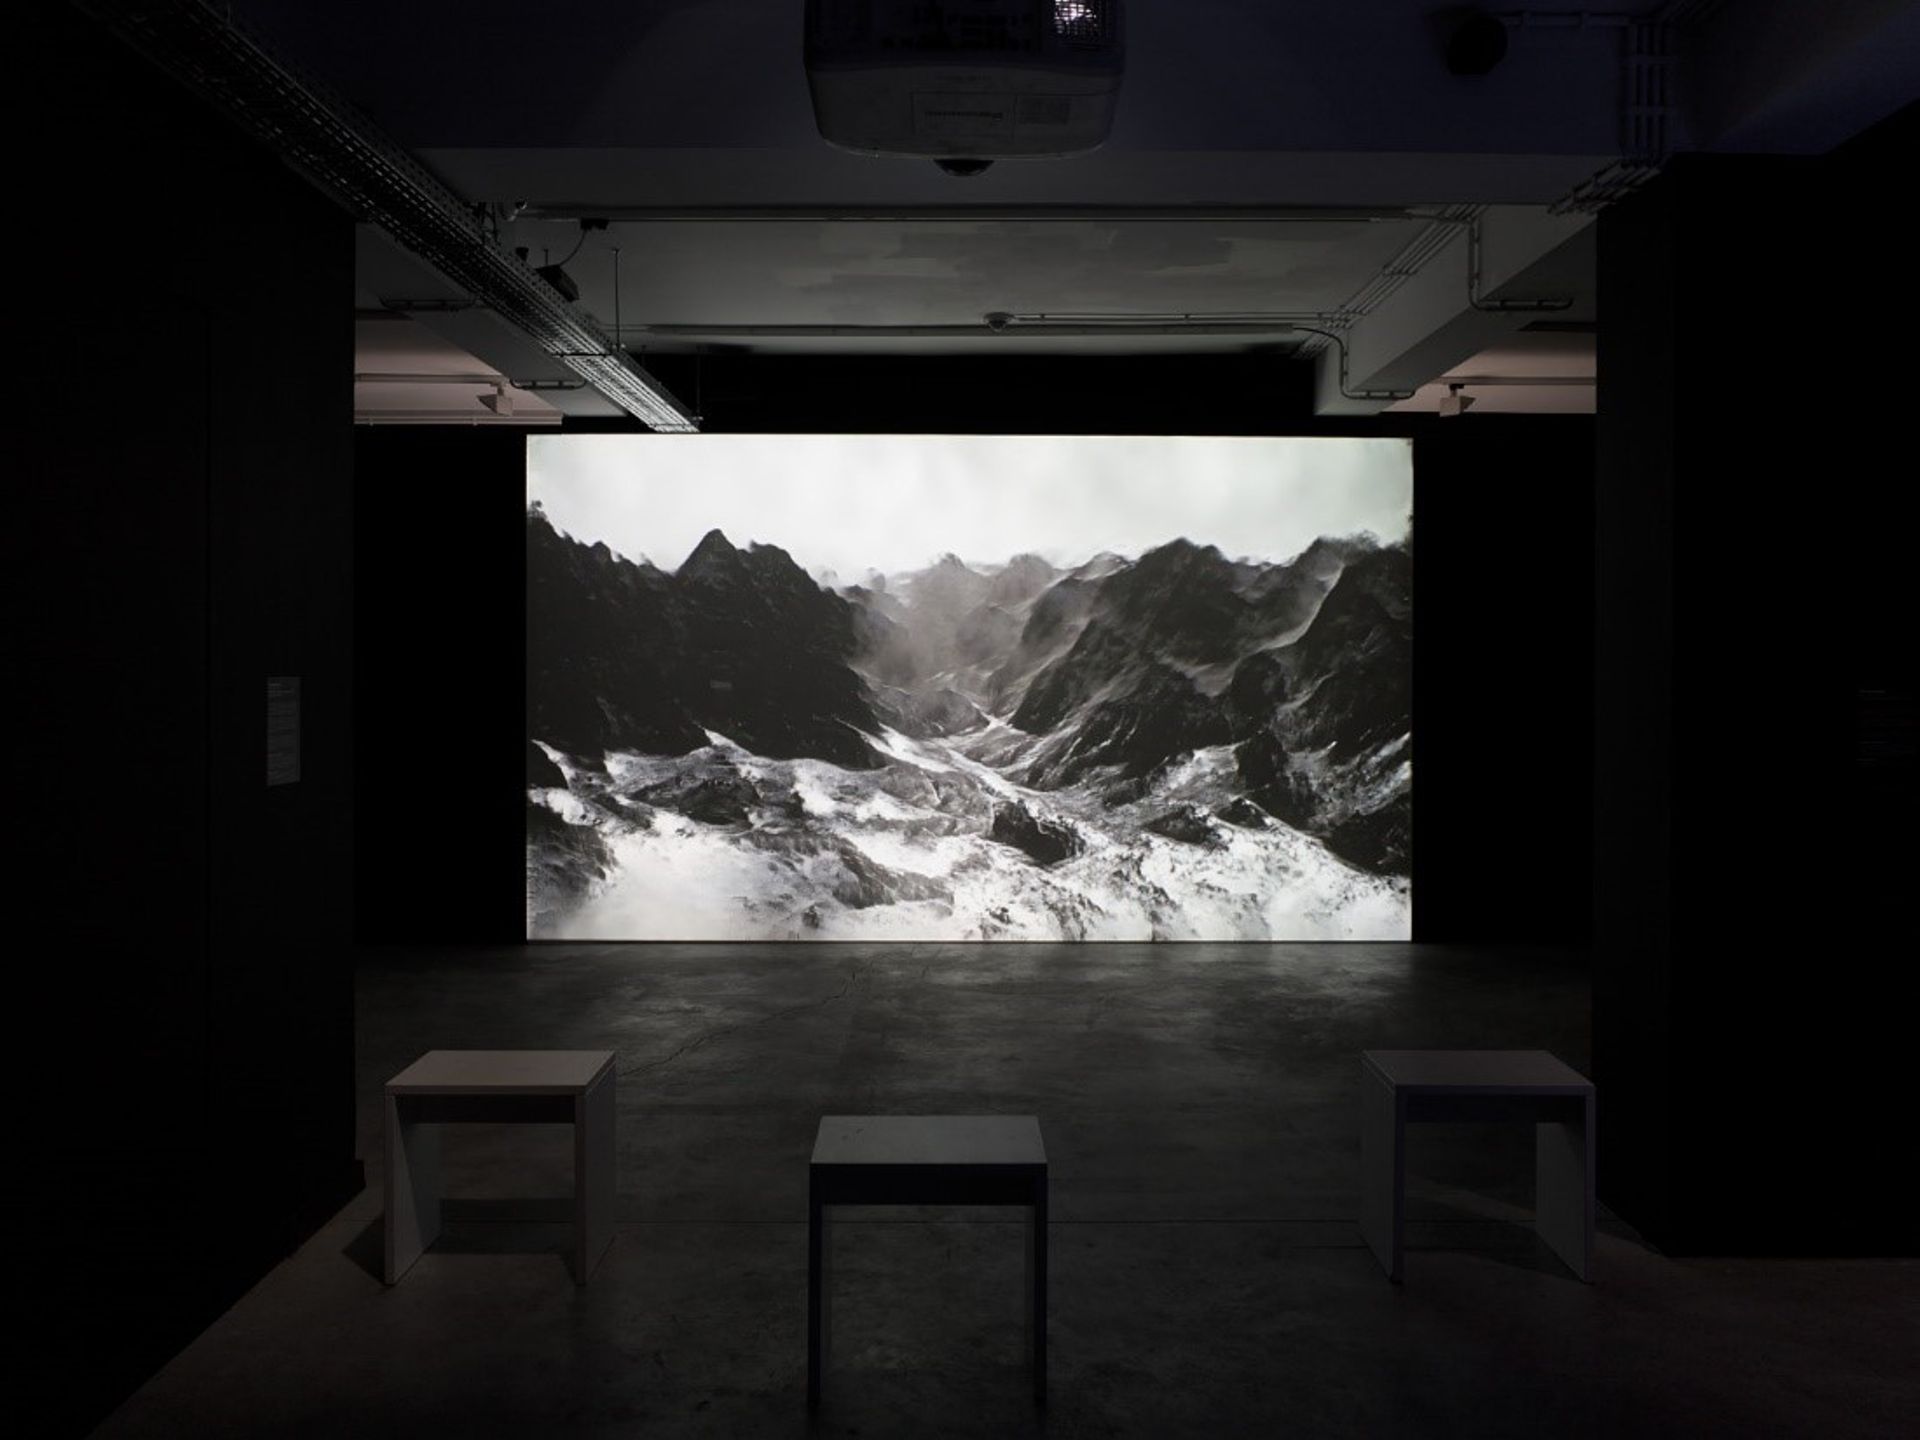 Installation view of Theresa Schubert’s Glacier Trilogy PART 1 (Re-imagining glaciers through artificial intelligence), 2022